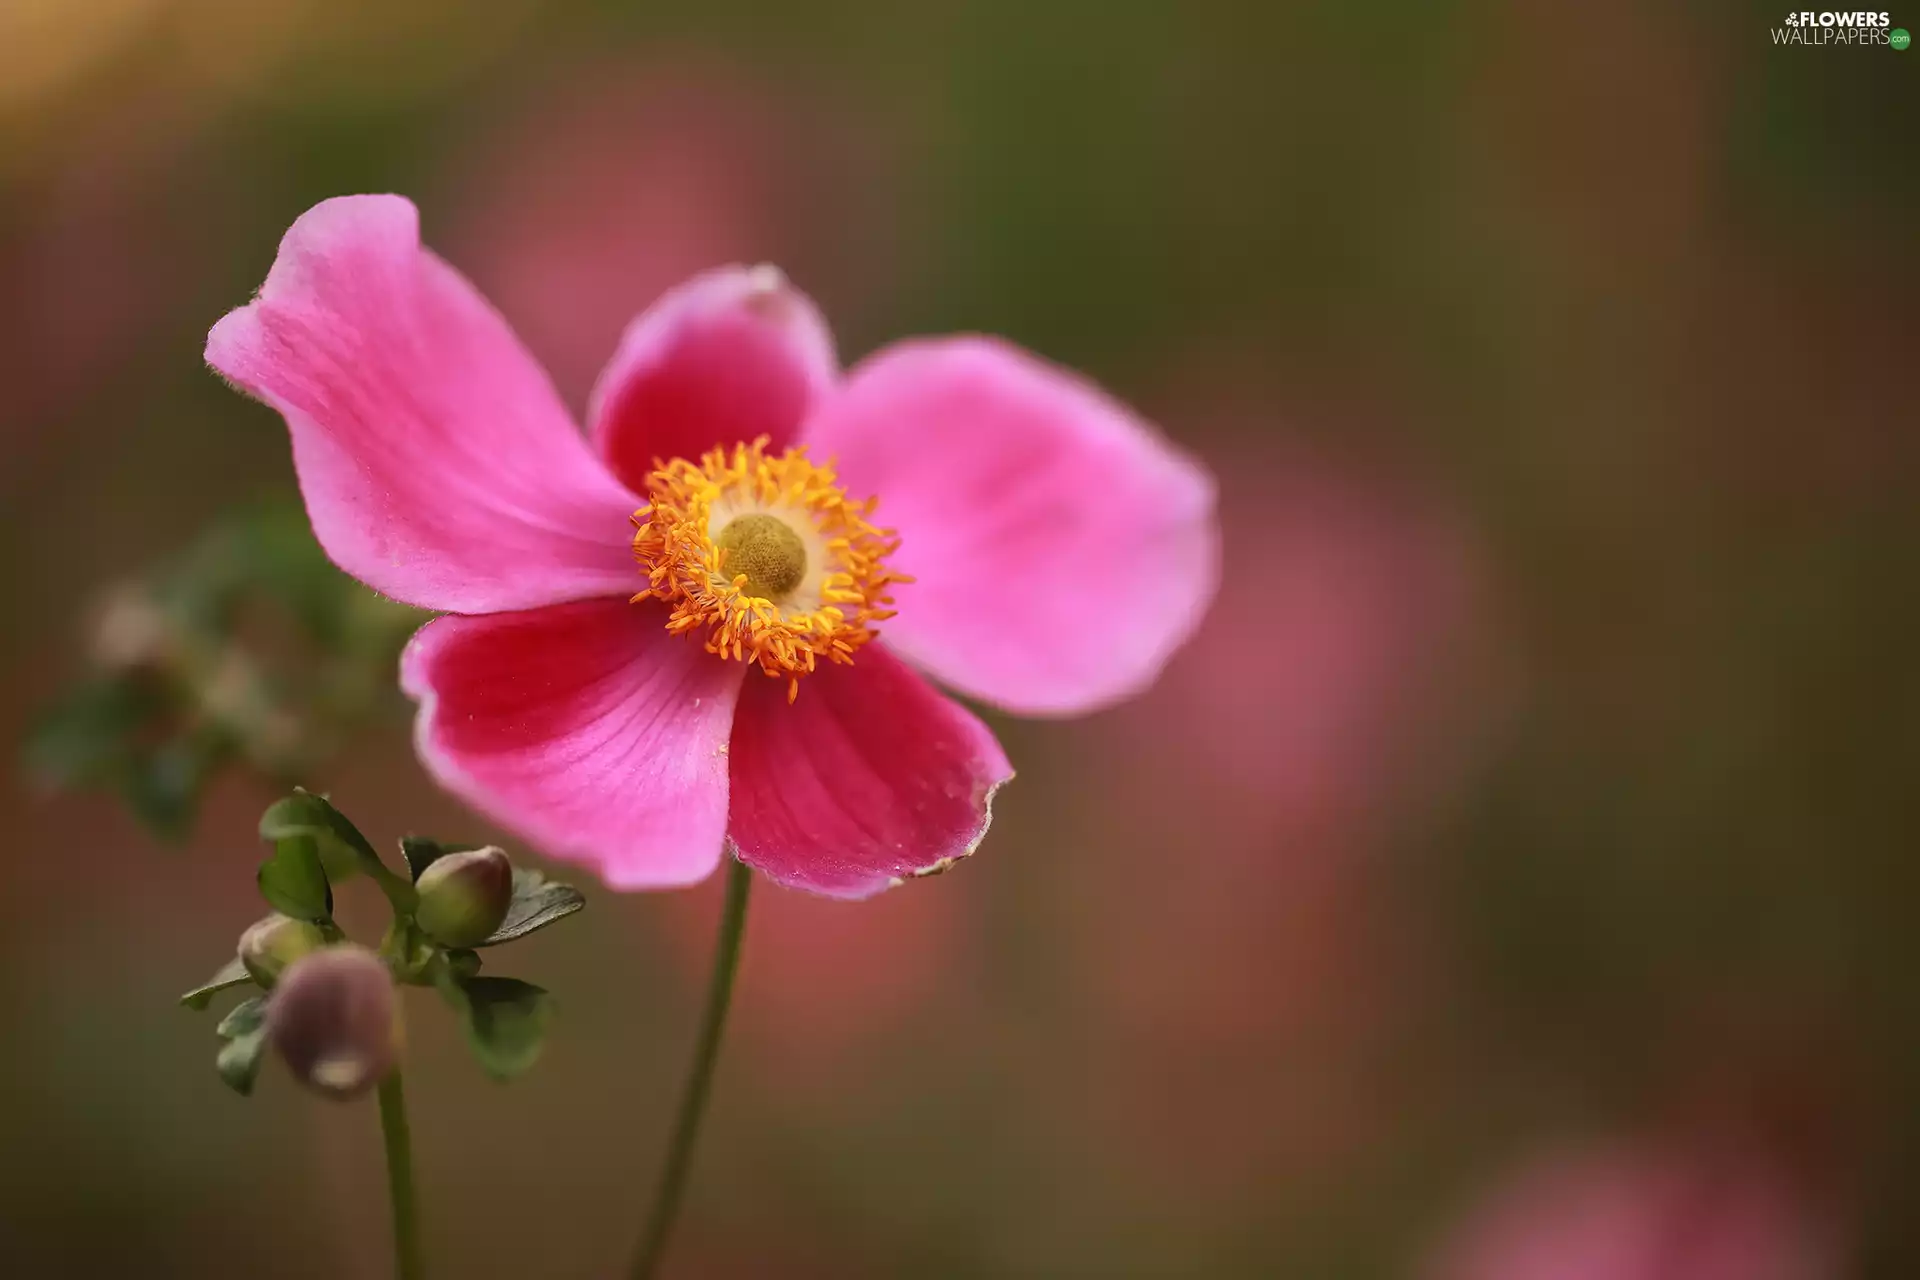 Japanese anemone, Colourfull Flowers, bud, Pink